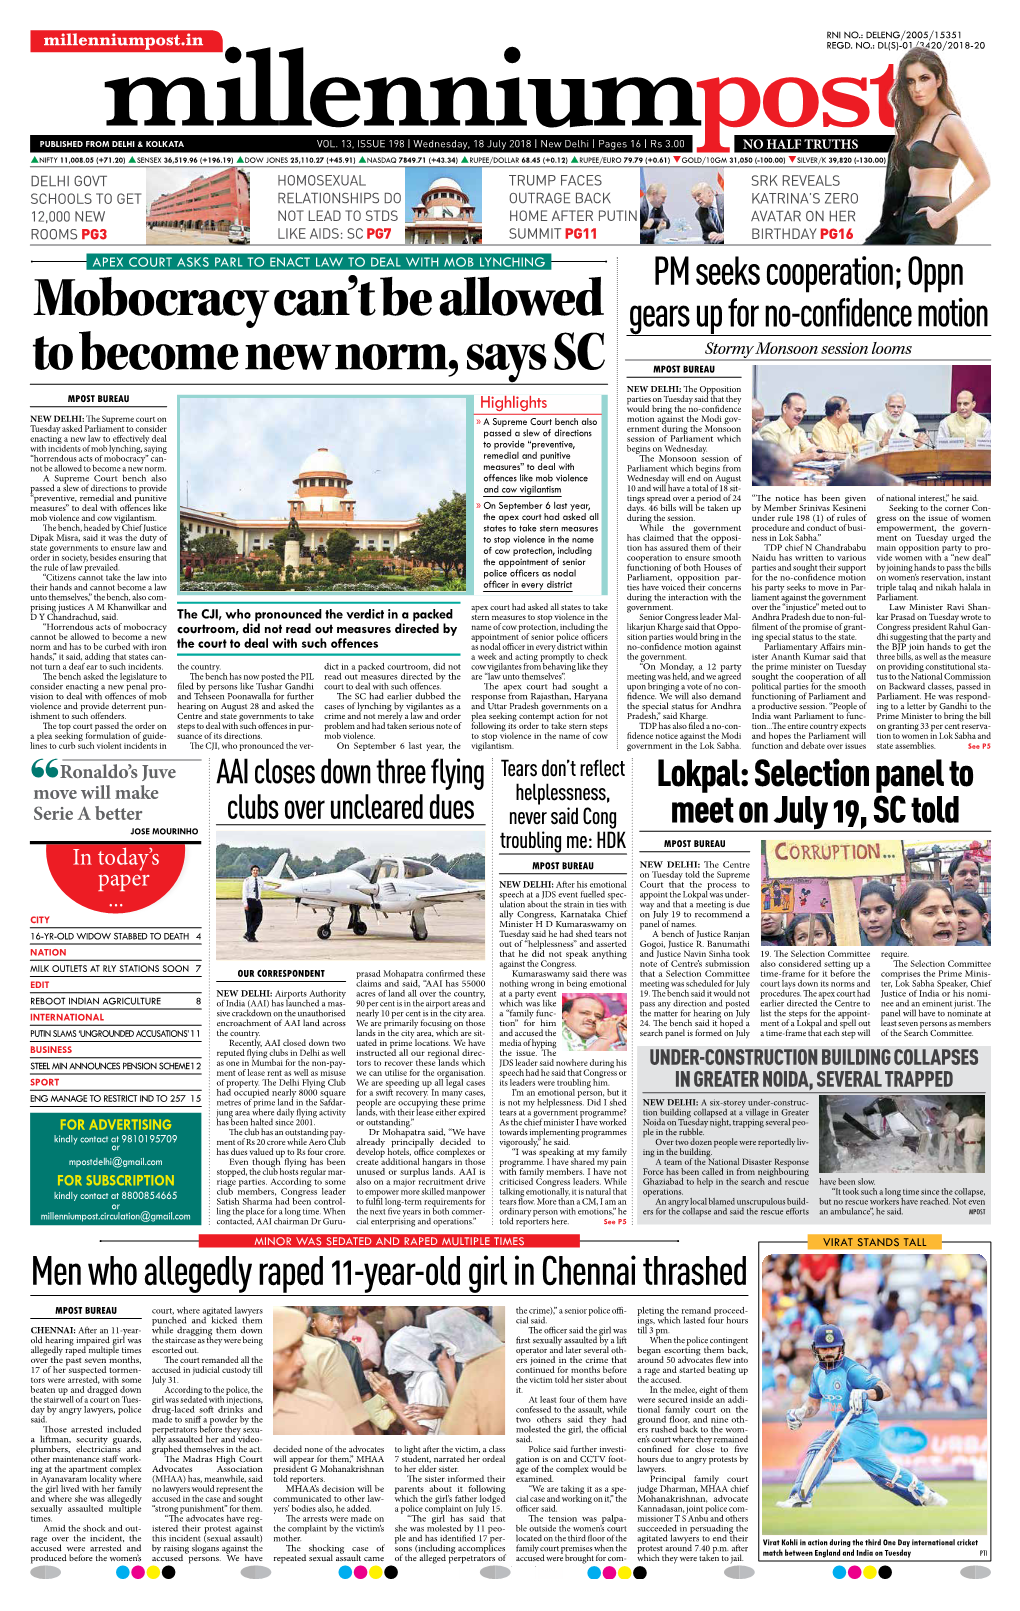 Mobocracy Can't Be Allowed to Become New Norm, Says SC